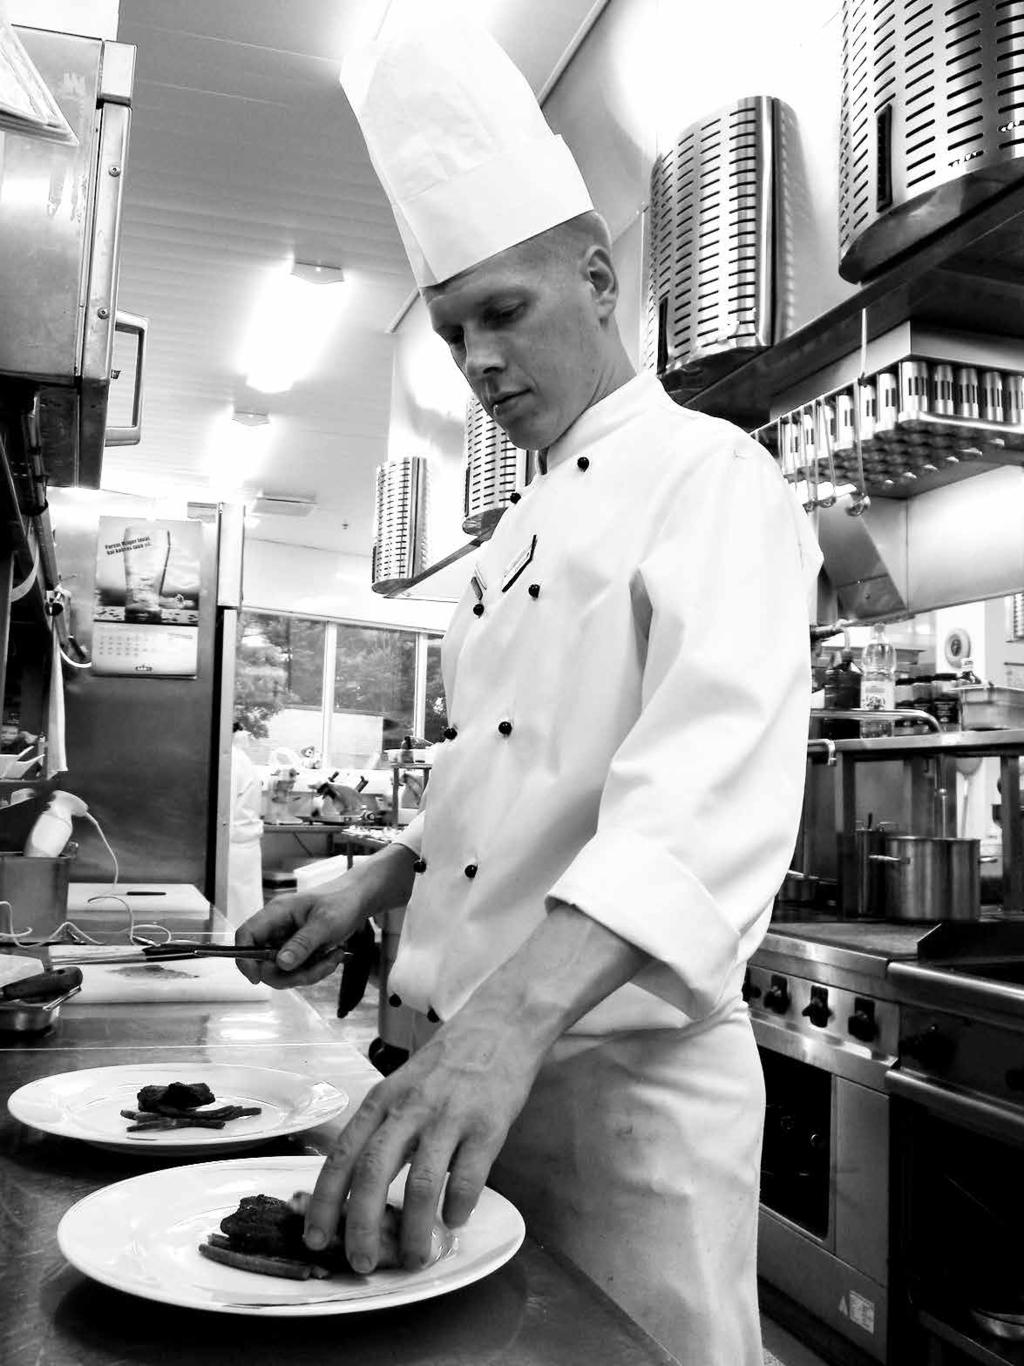 Getting it right in the kitchen. Chefs understand the discipline of sound training and skills development, and ServiceIQ s qualifications fit the bill.